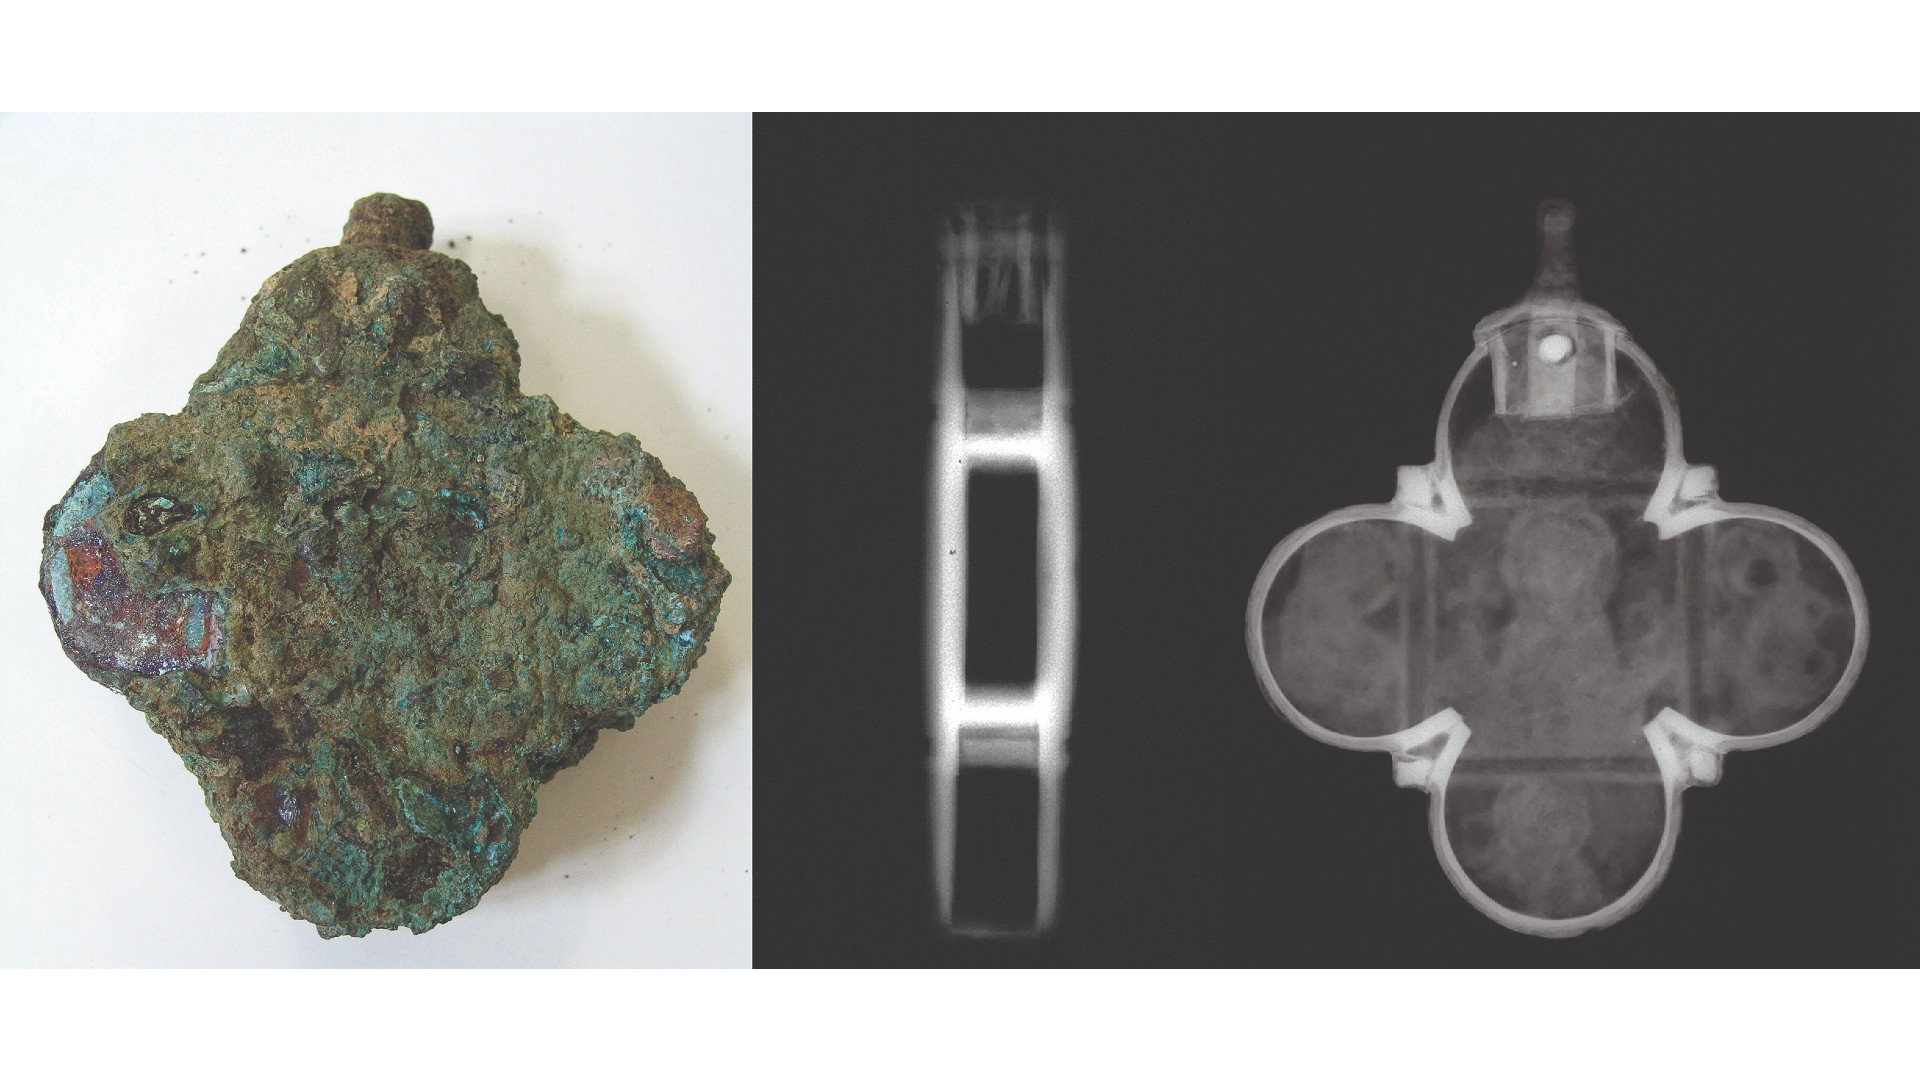 The pendant was heavily corroded when it was discovered in 2008 during excavations of an ancient rubbish pit in the German city of Mainz, after lying there for at least 600 years.  Left is the corroded pendant in a four-leaf clover/cross shape.  Right is an x-ray image of the pendant.